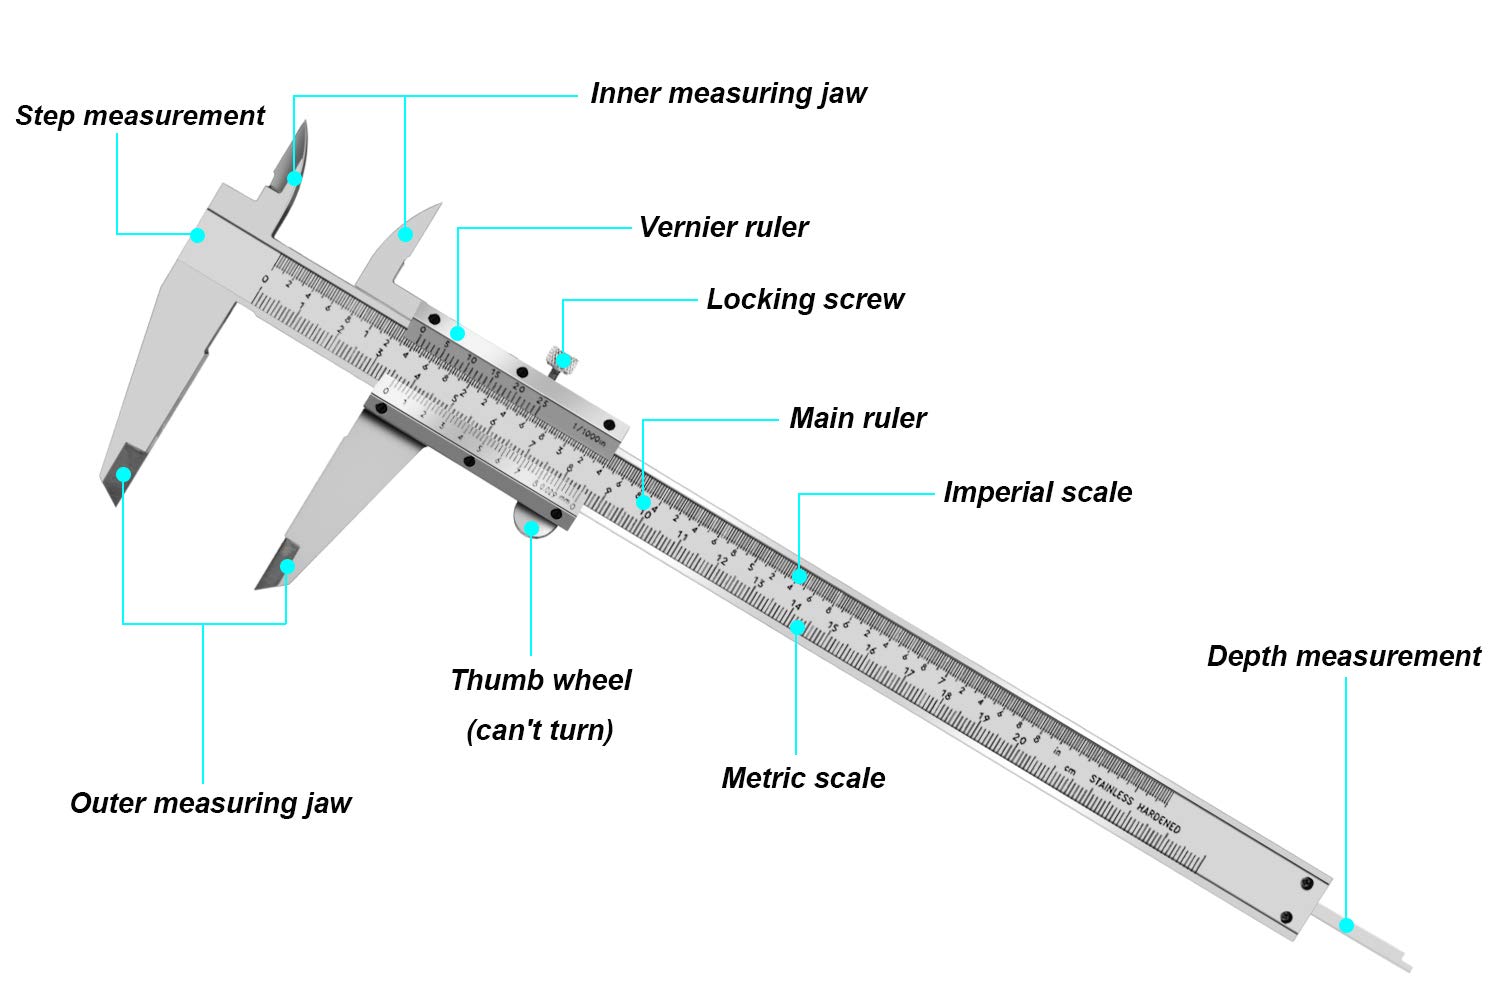 ZLKSKER 8 Inch / 20 cm Micrometer Vernier Caliper, Stainless Steel Precision Measuring Tool (Inch/Metric), Depth/Inside/Outside/Step Measurement, Accuracy 0.001" / 0.02mm